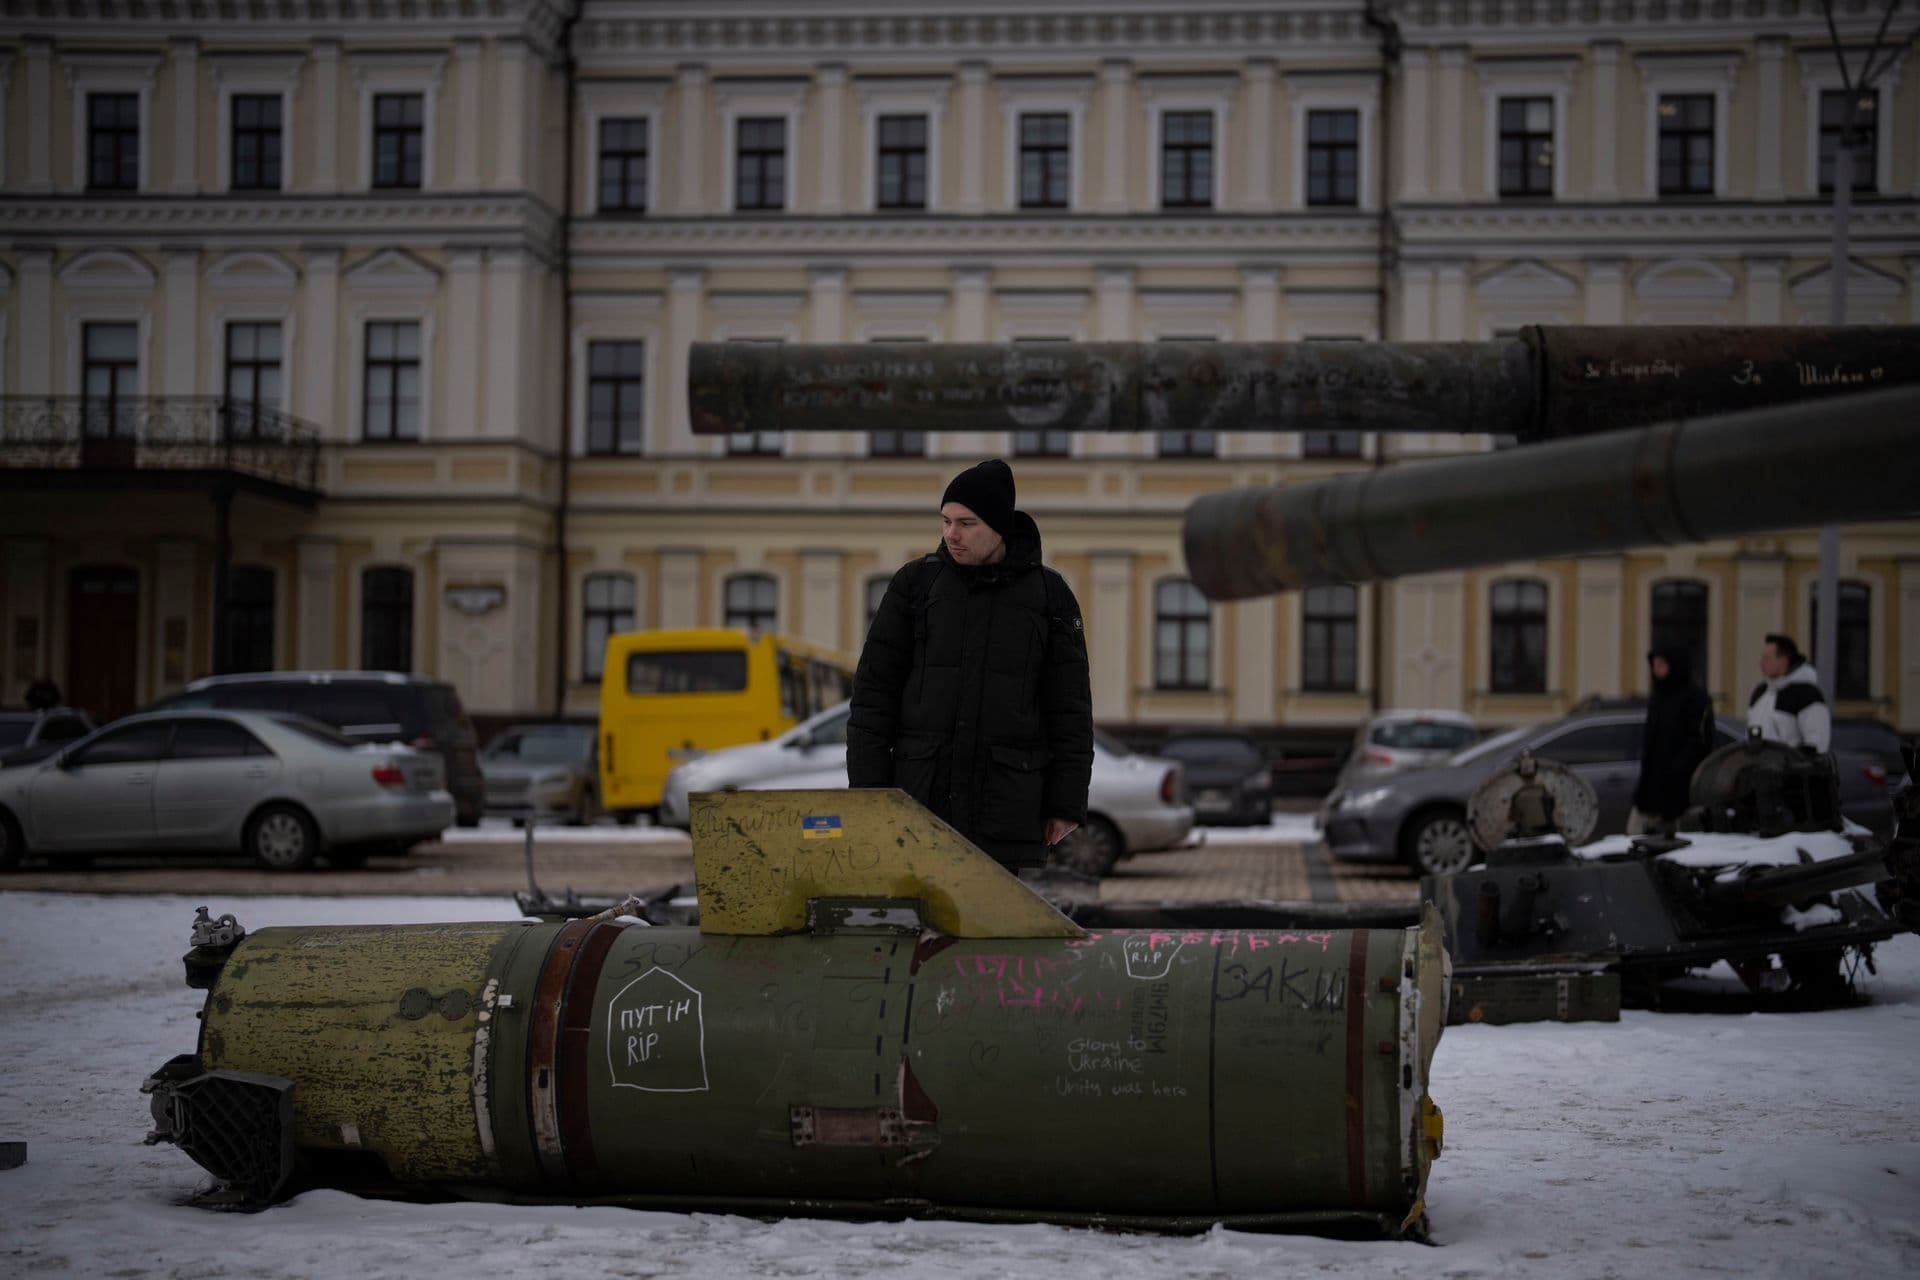 A man looks at the remains of a Russian missile displayed in central Kyiv